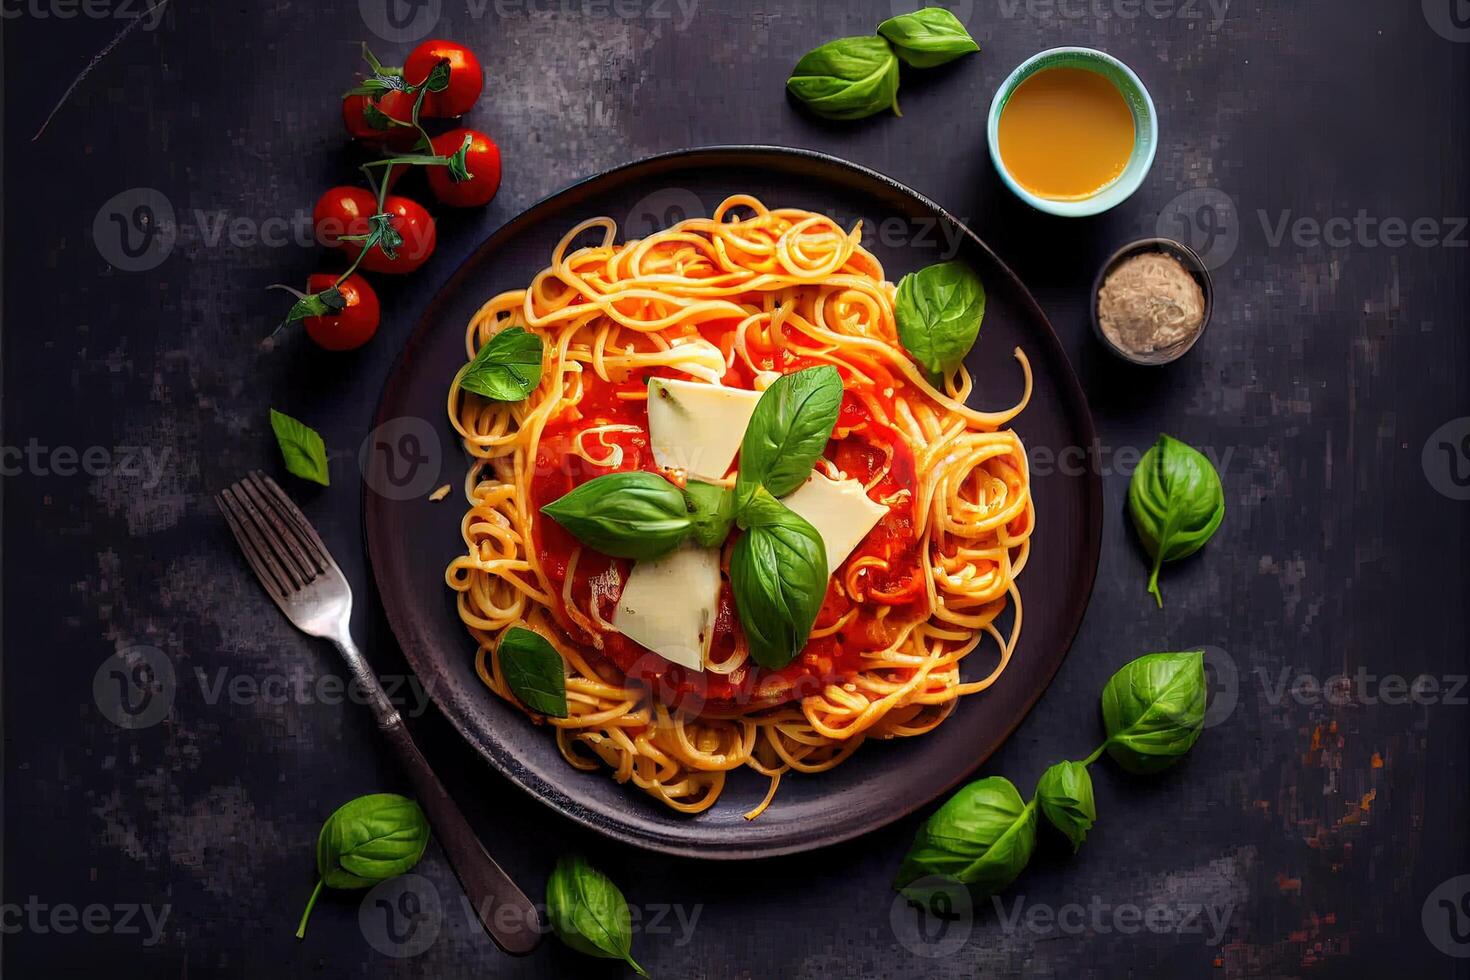 illustration of tasty appetizing classic italian spaghetti pasta with tomato sauce, cheese parmesan and basil on plate on dark table. View from above photo